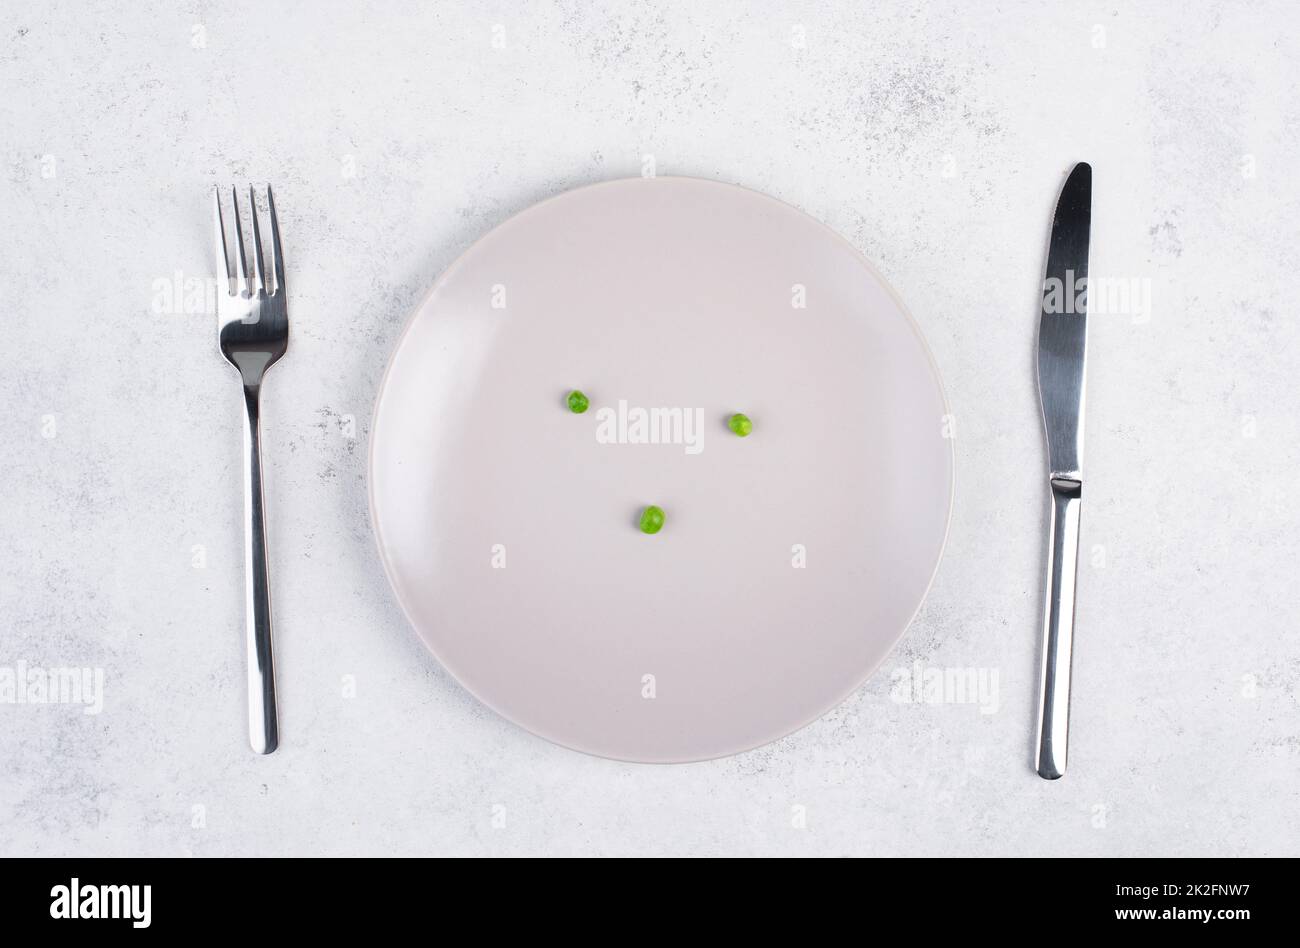 Three green peas on a plate, fork and knife on the table, diet and loosing weight concept, healthy lifestyle Stock Photo